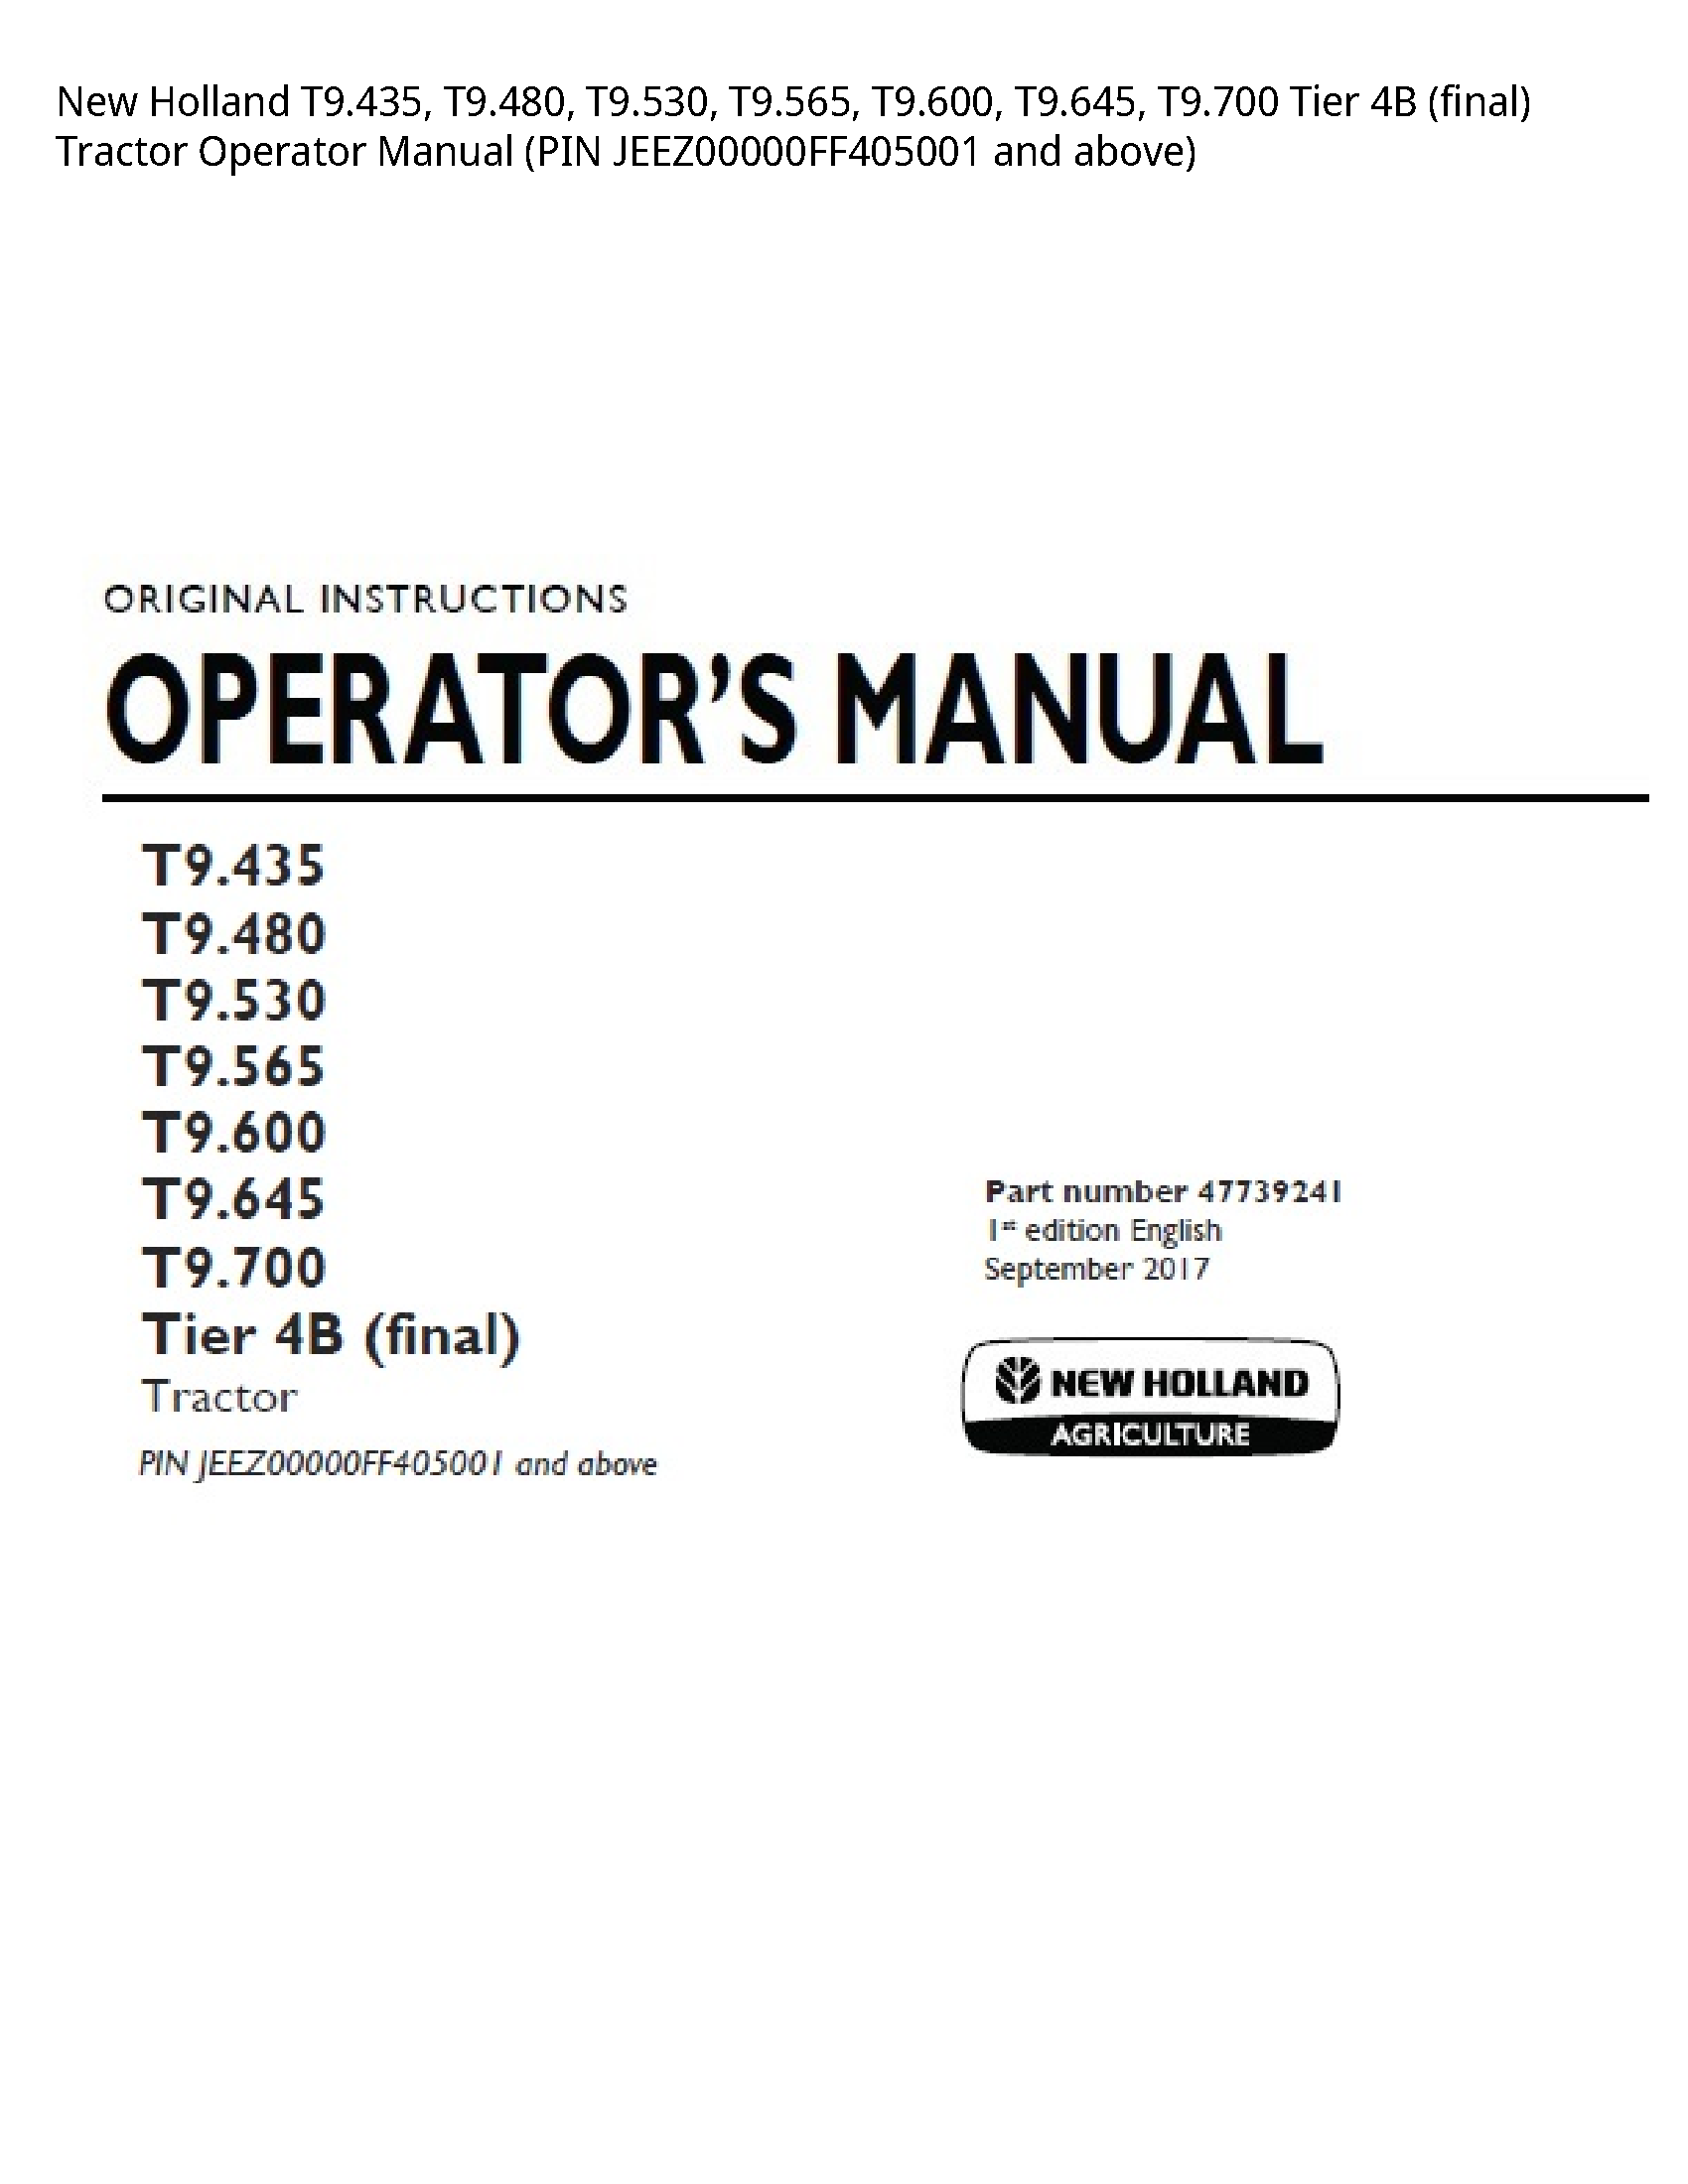 New Holland T9.435 Tier (final) Tractor Operator manual